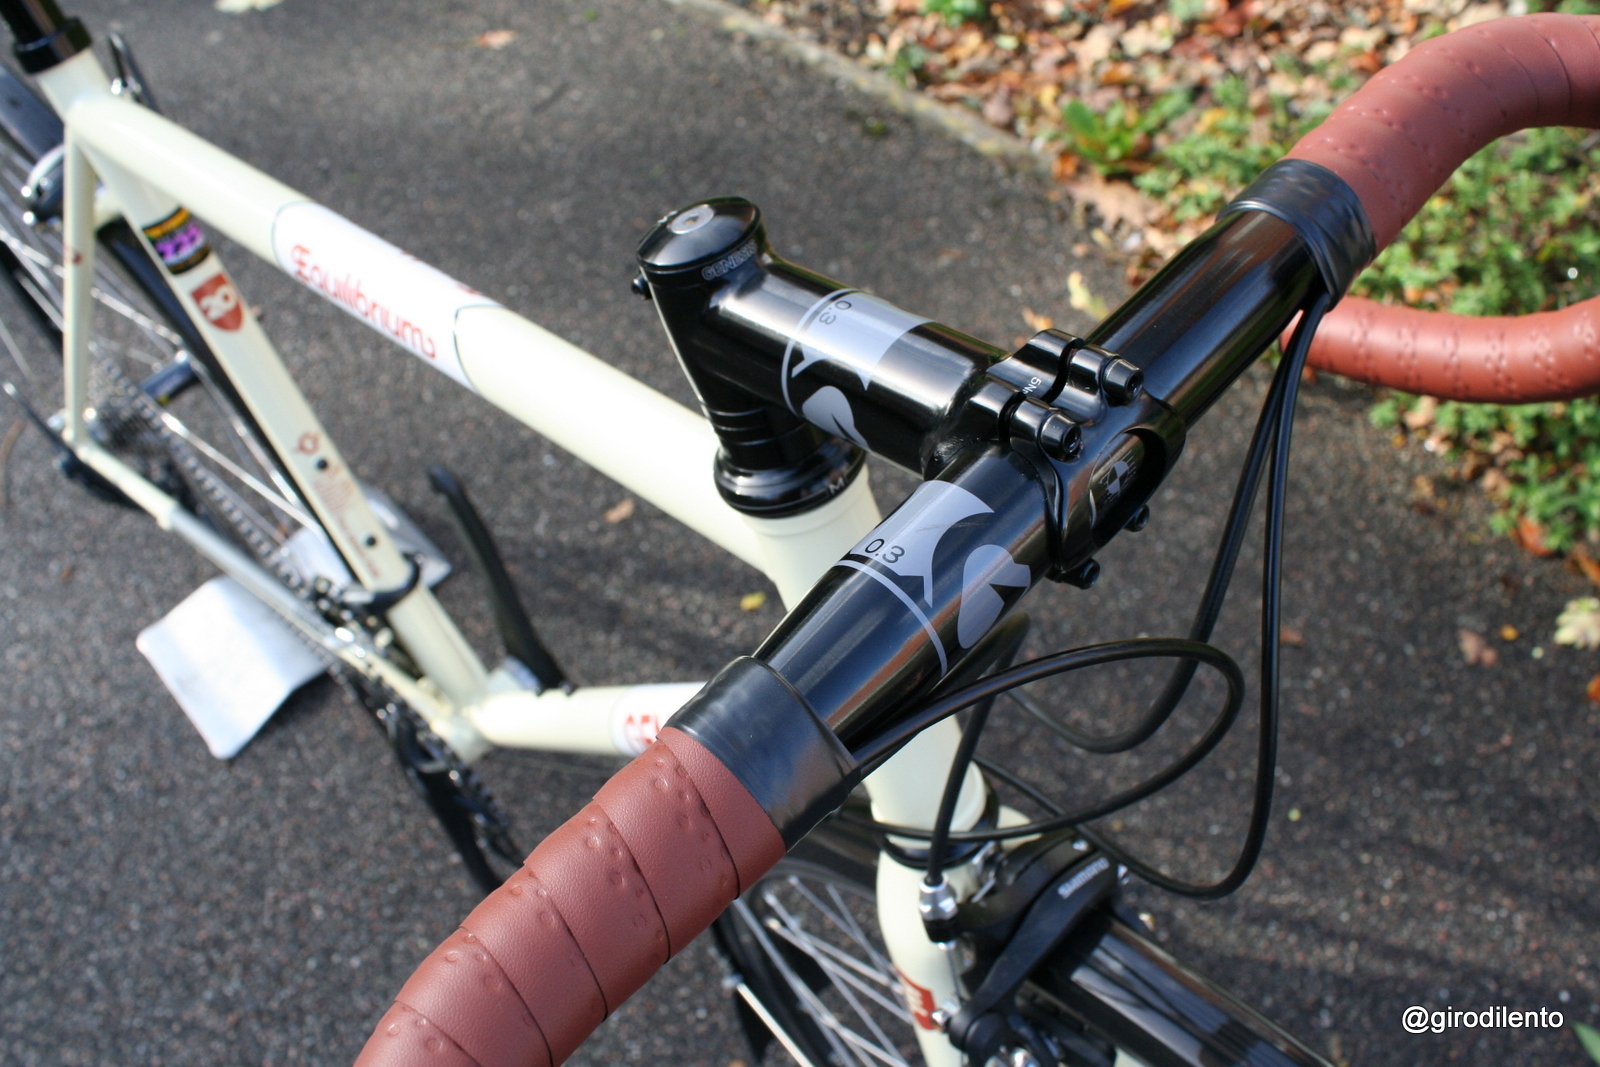 Genesis bars and stem look great on the bike and seem nice to ride so far